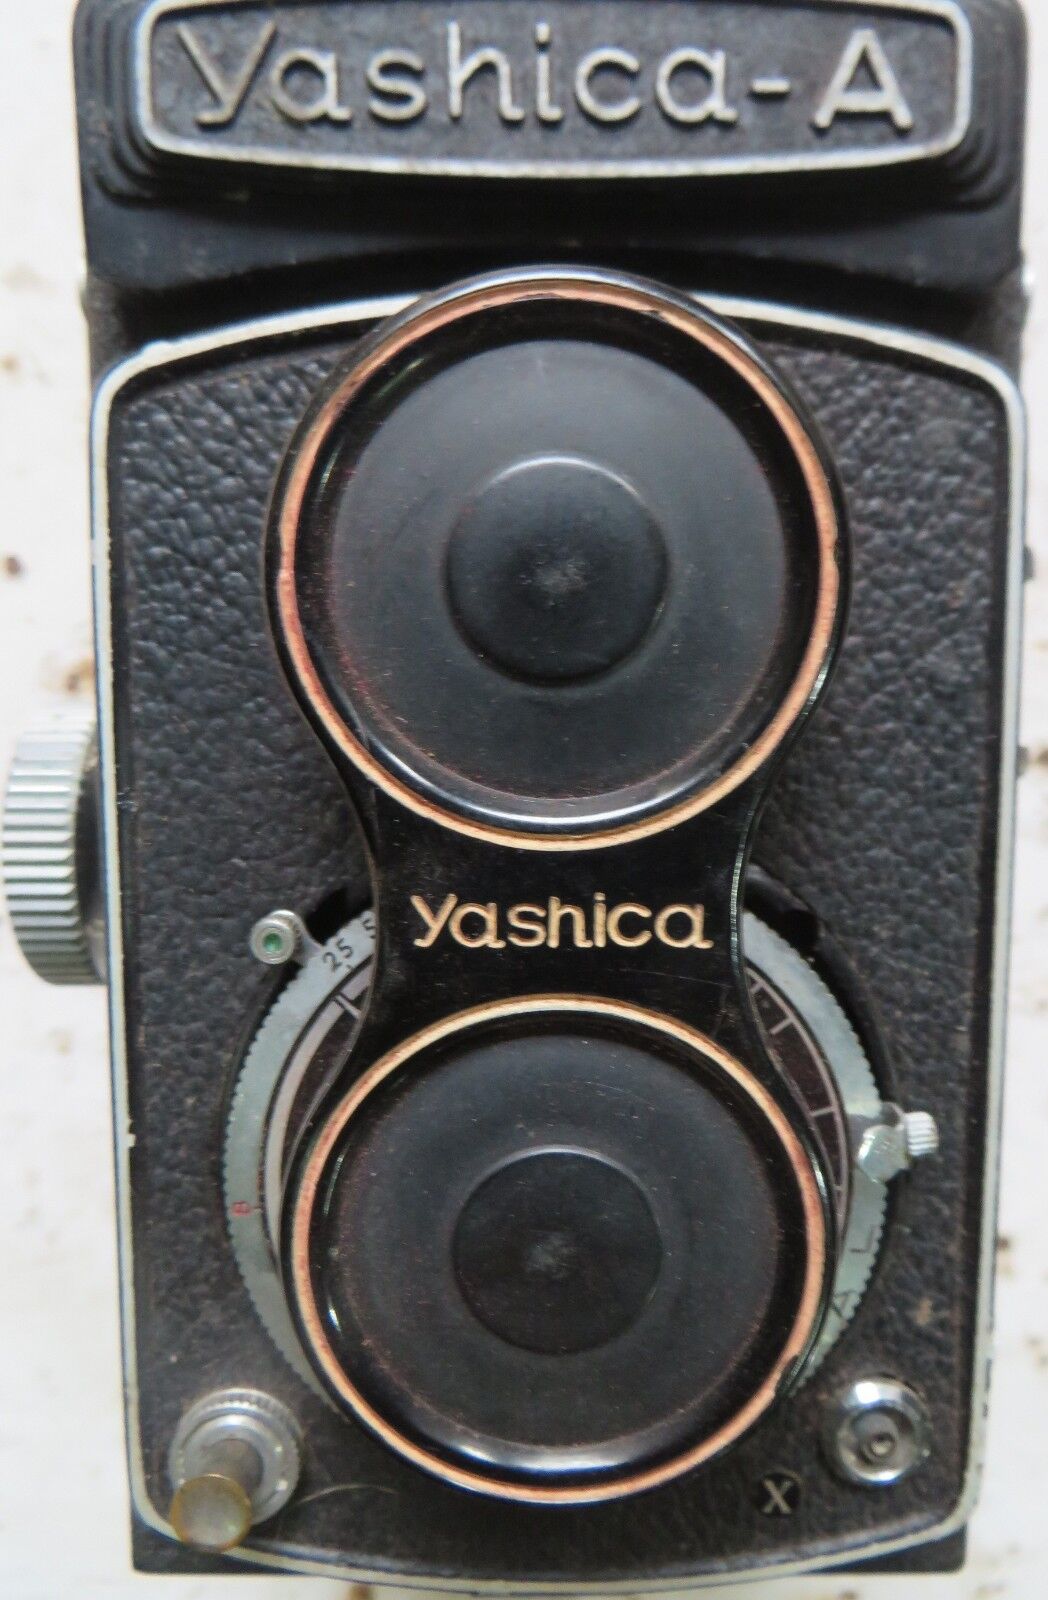 VINTAGE YASHICA -A PHOTOGRAPHY CAMERA Japan COPAL 80MM SHUTTER TLR  C1960 Used  